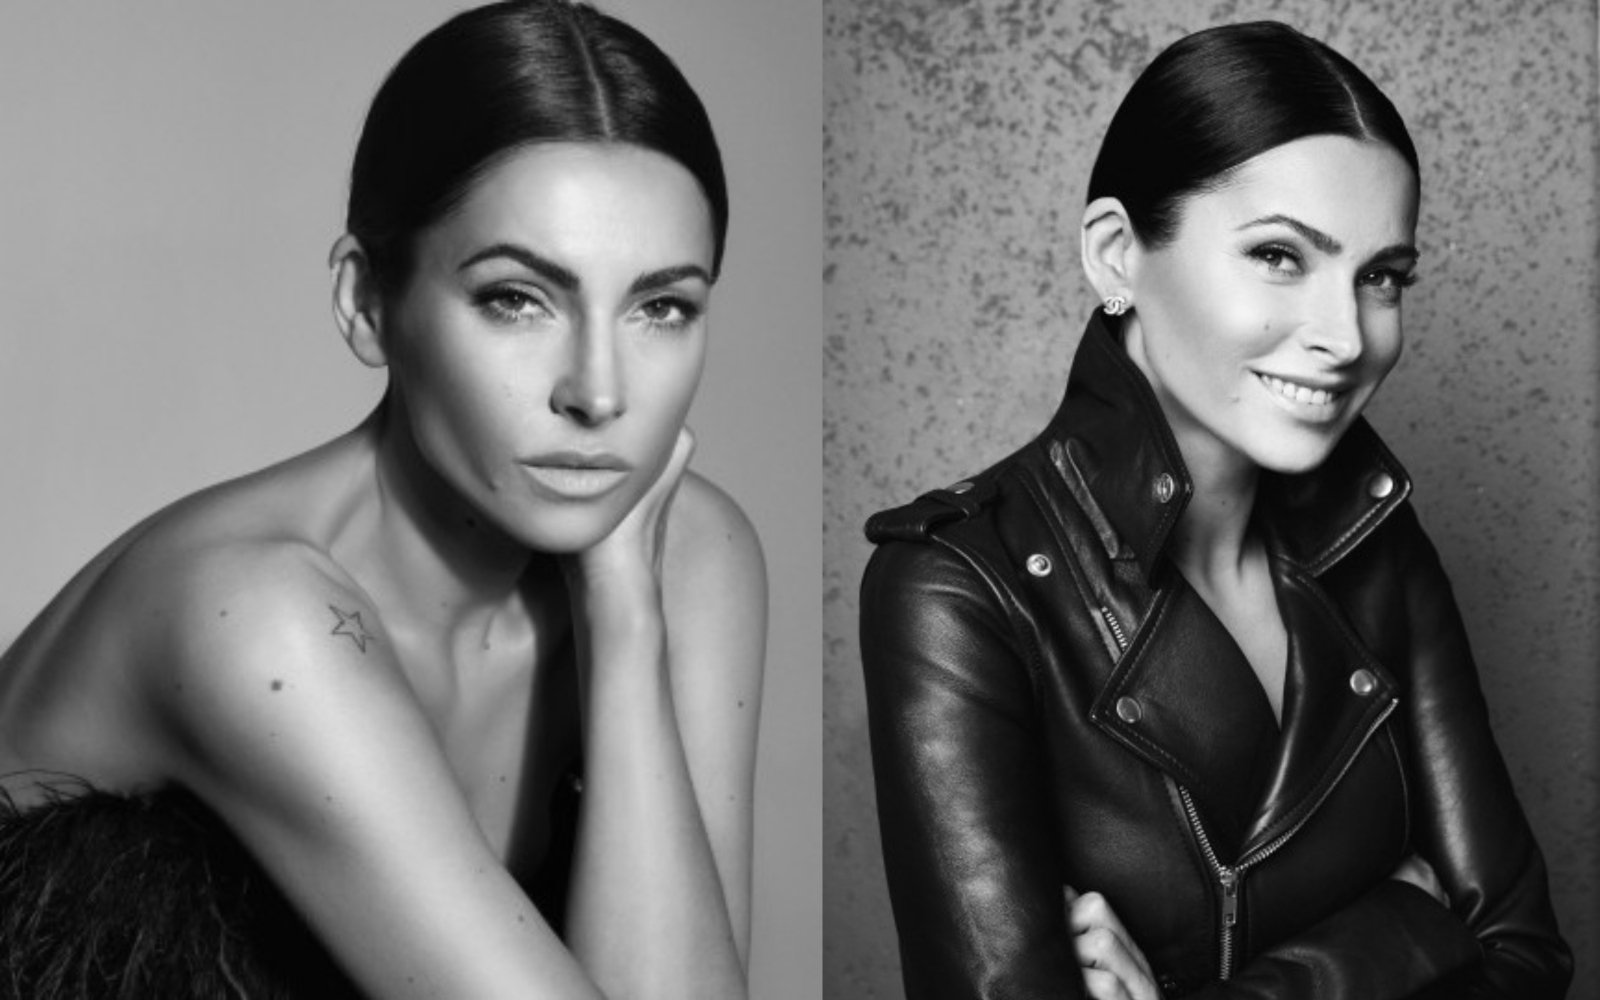 Lithuanian stylist and influencer Agne Jagelaviciute passed away at age 42  